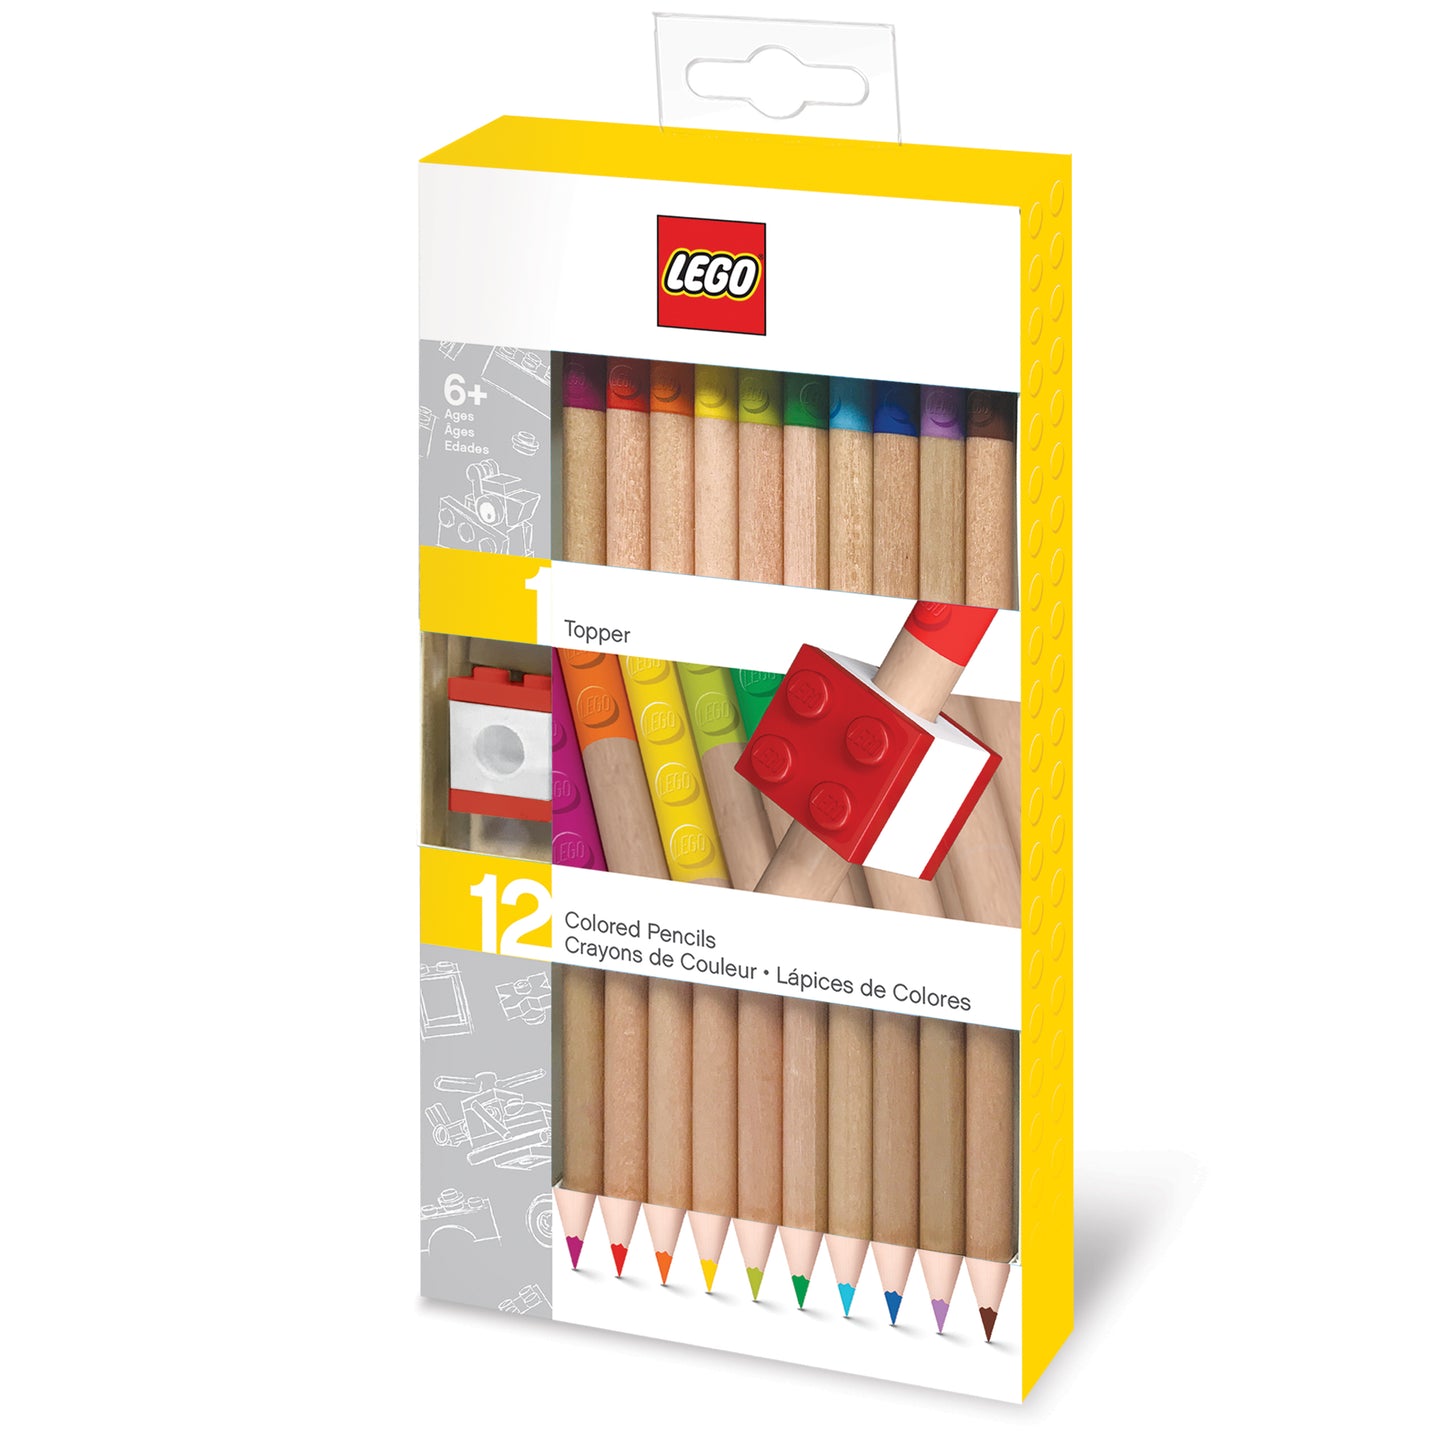 IQ LEGO® 2.0 Stationery 12 Pack Colored Pencils with 1 Brick Pencil Topper (52064)